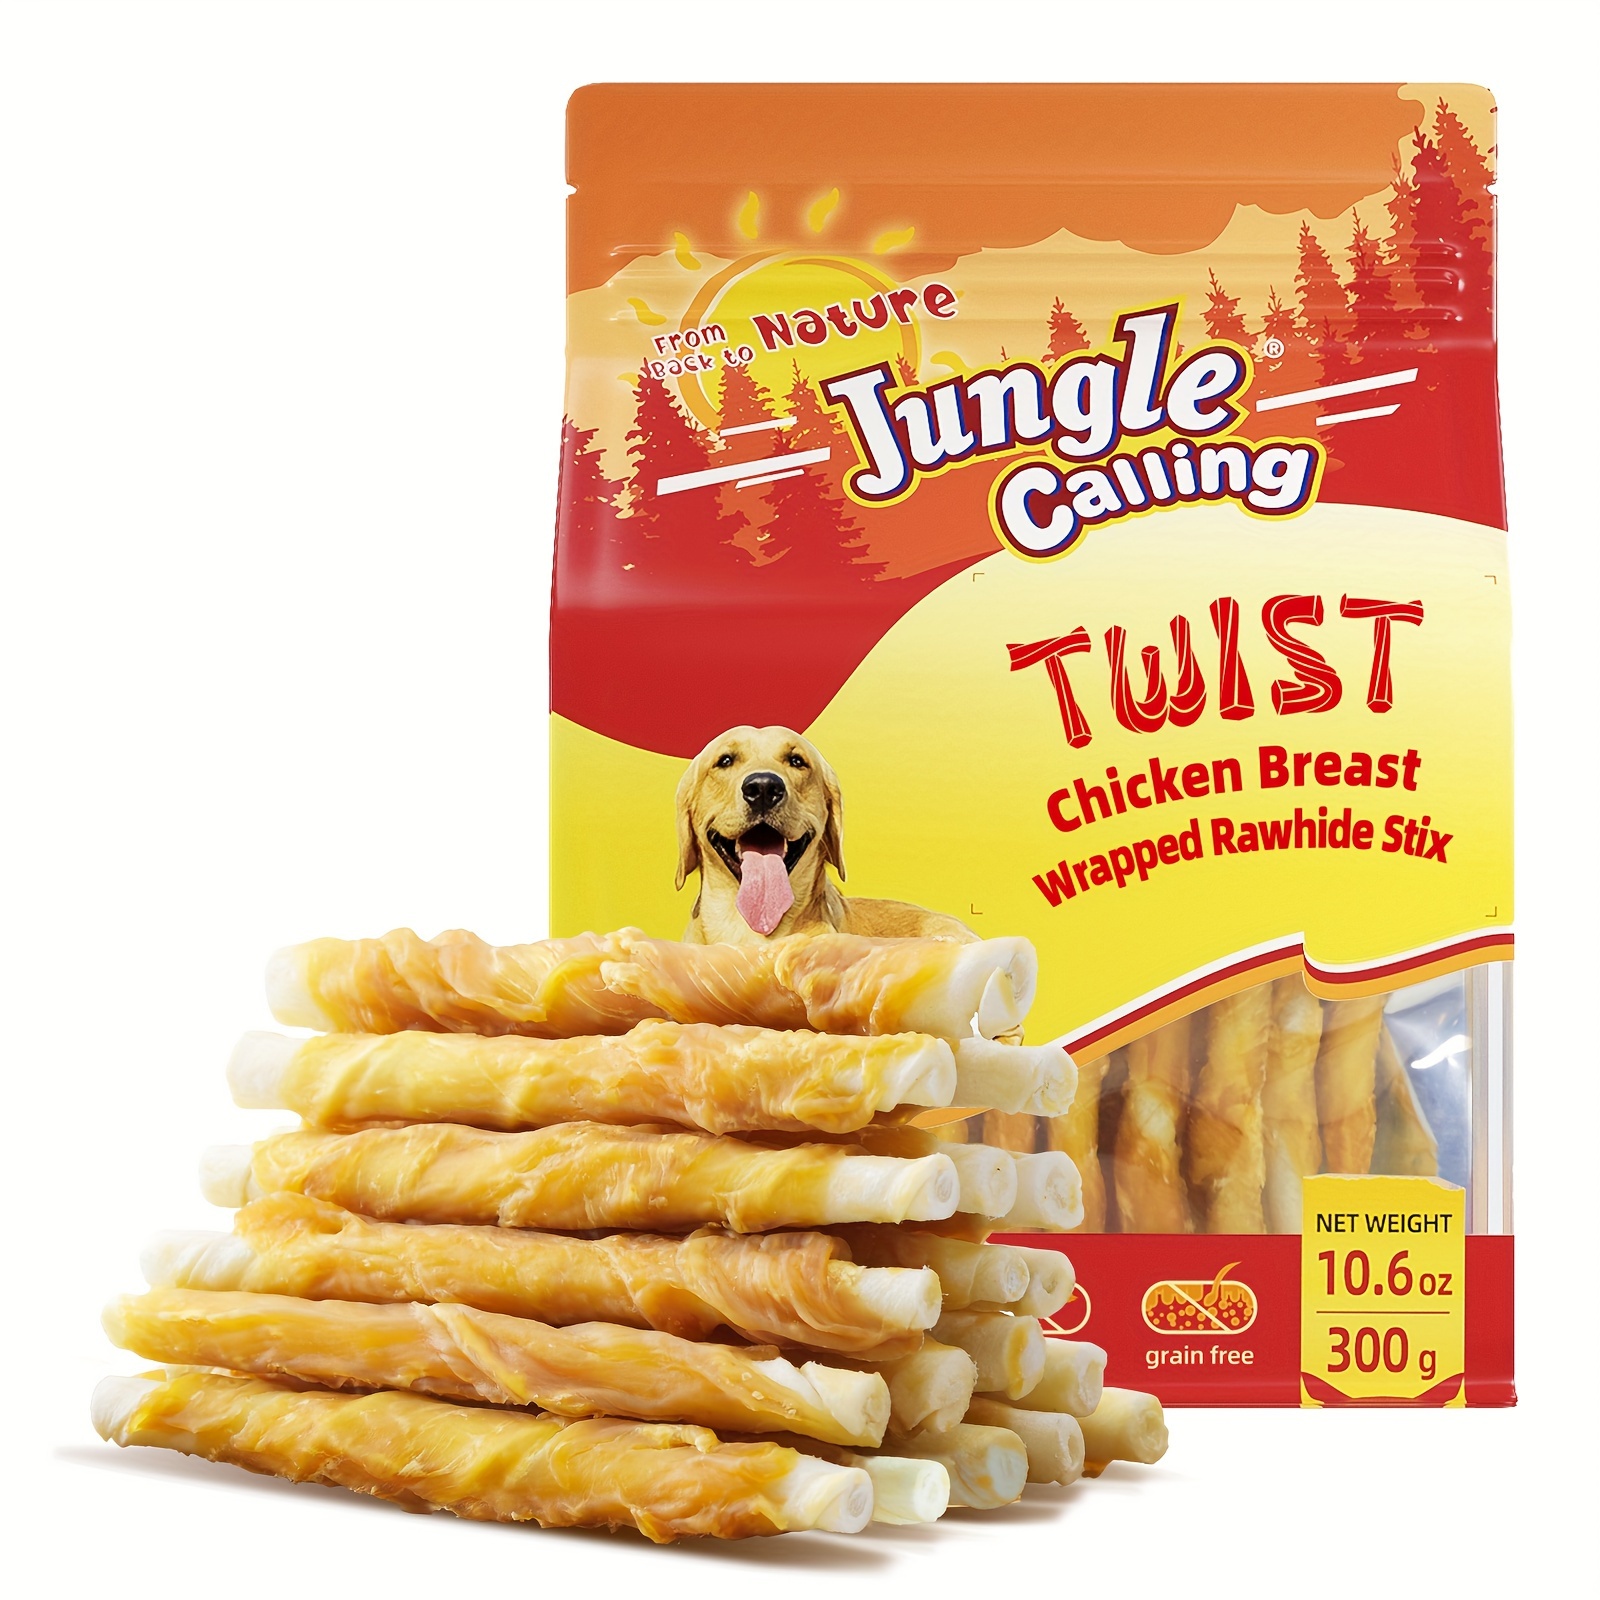 

Jungle Calling Dog Treats, Chicken Wrapped Rawhide Sticks For Dogs, Grain-free Natural Small Dogs Training Treats, Pet Chew Snacks, 10.6 Oz